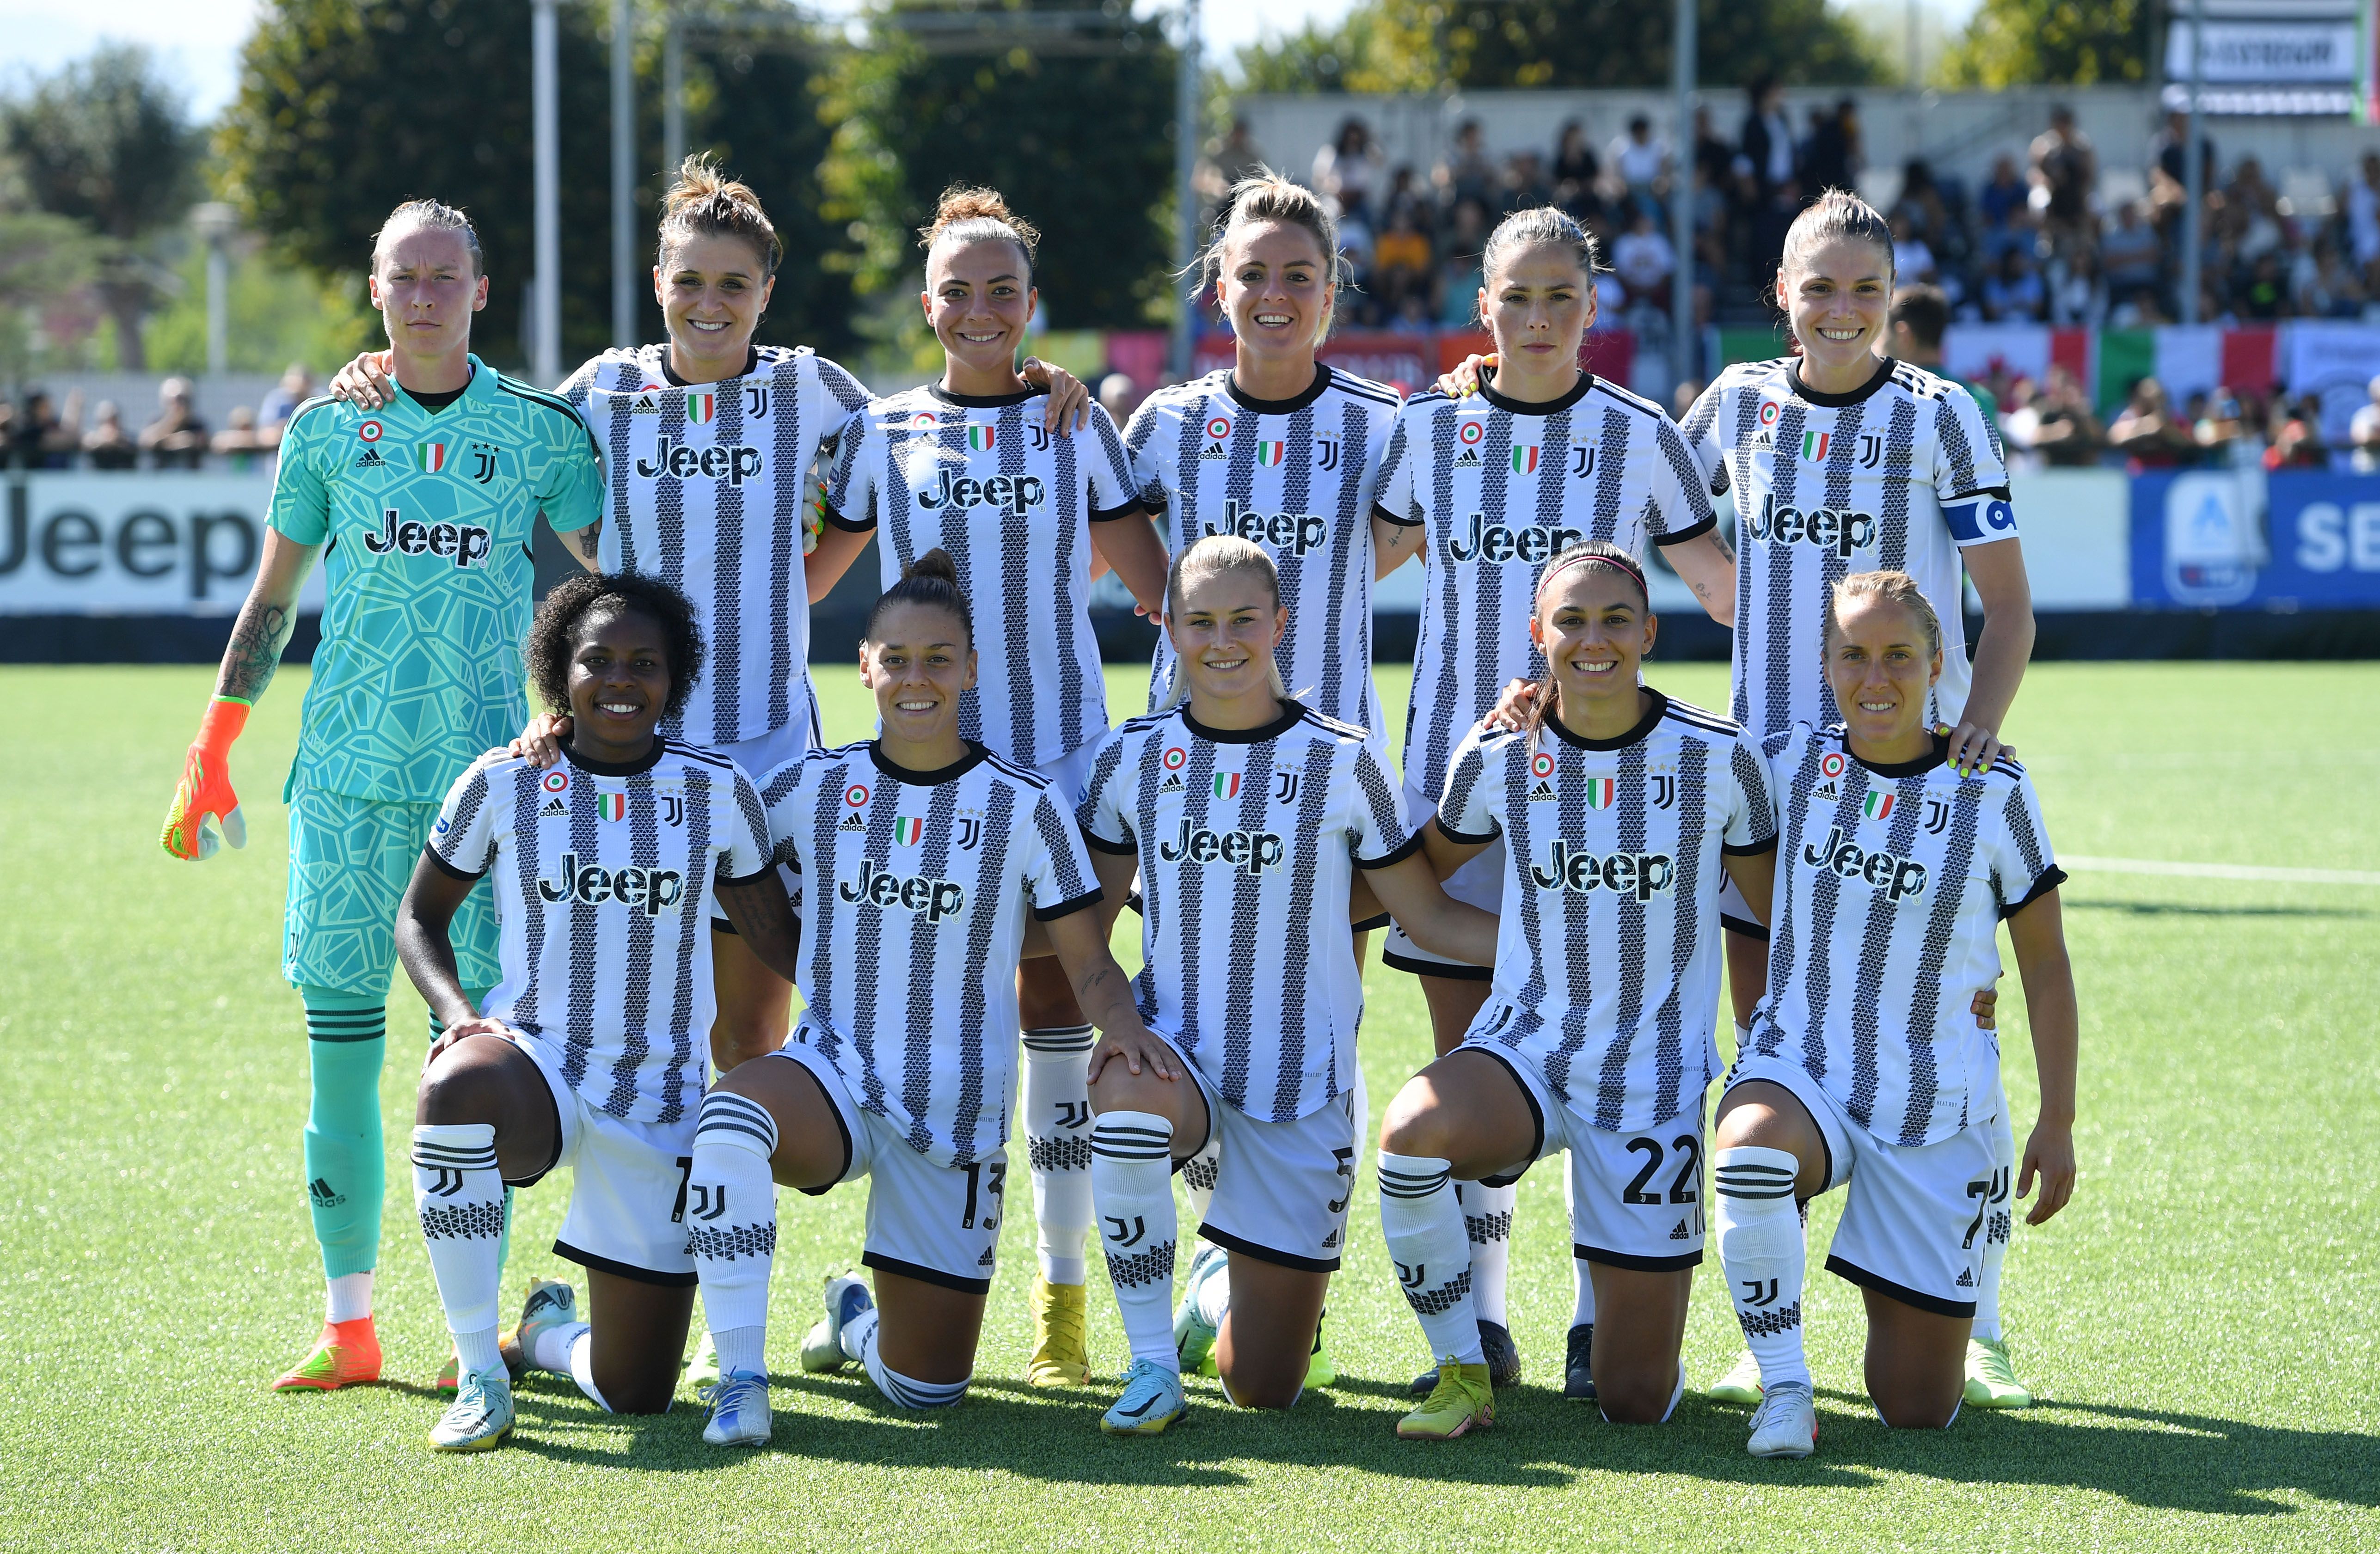 Juventus will play in the Women's Champions League